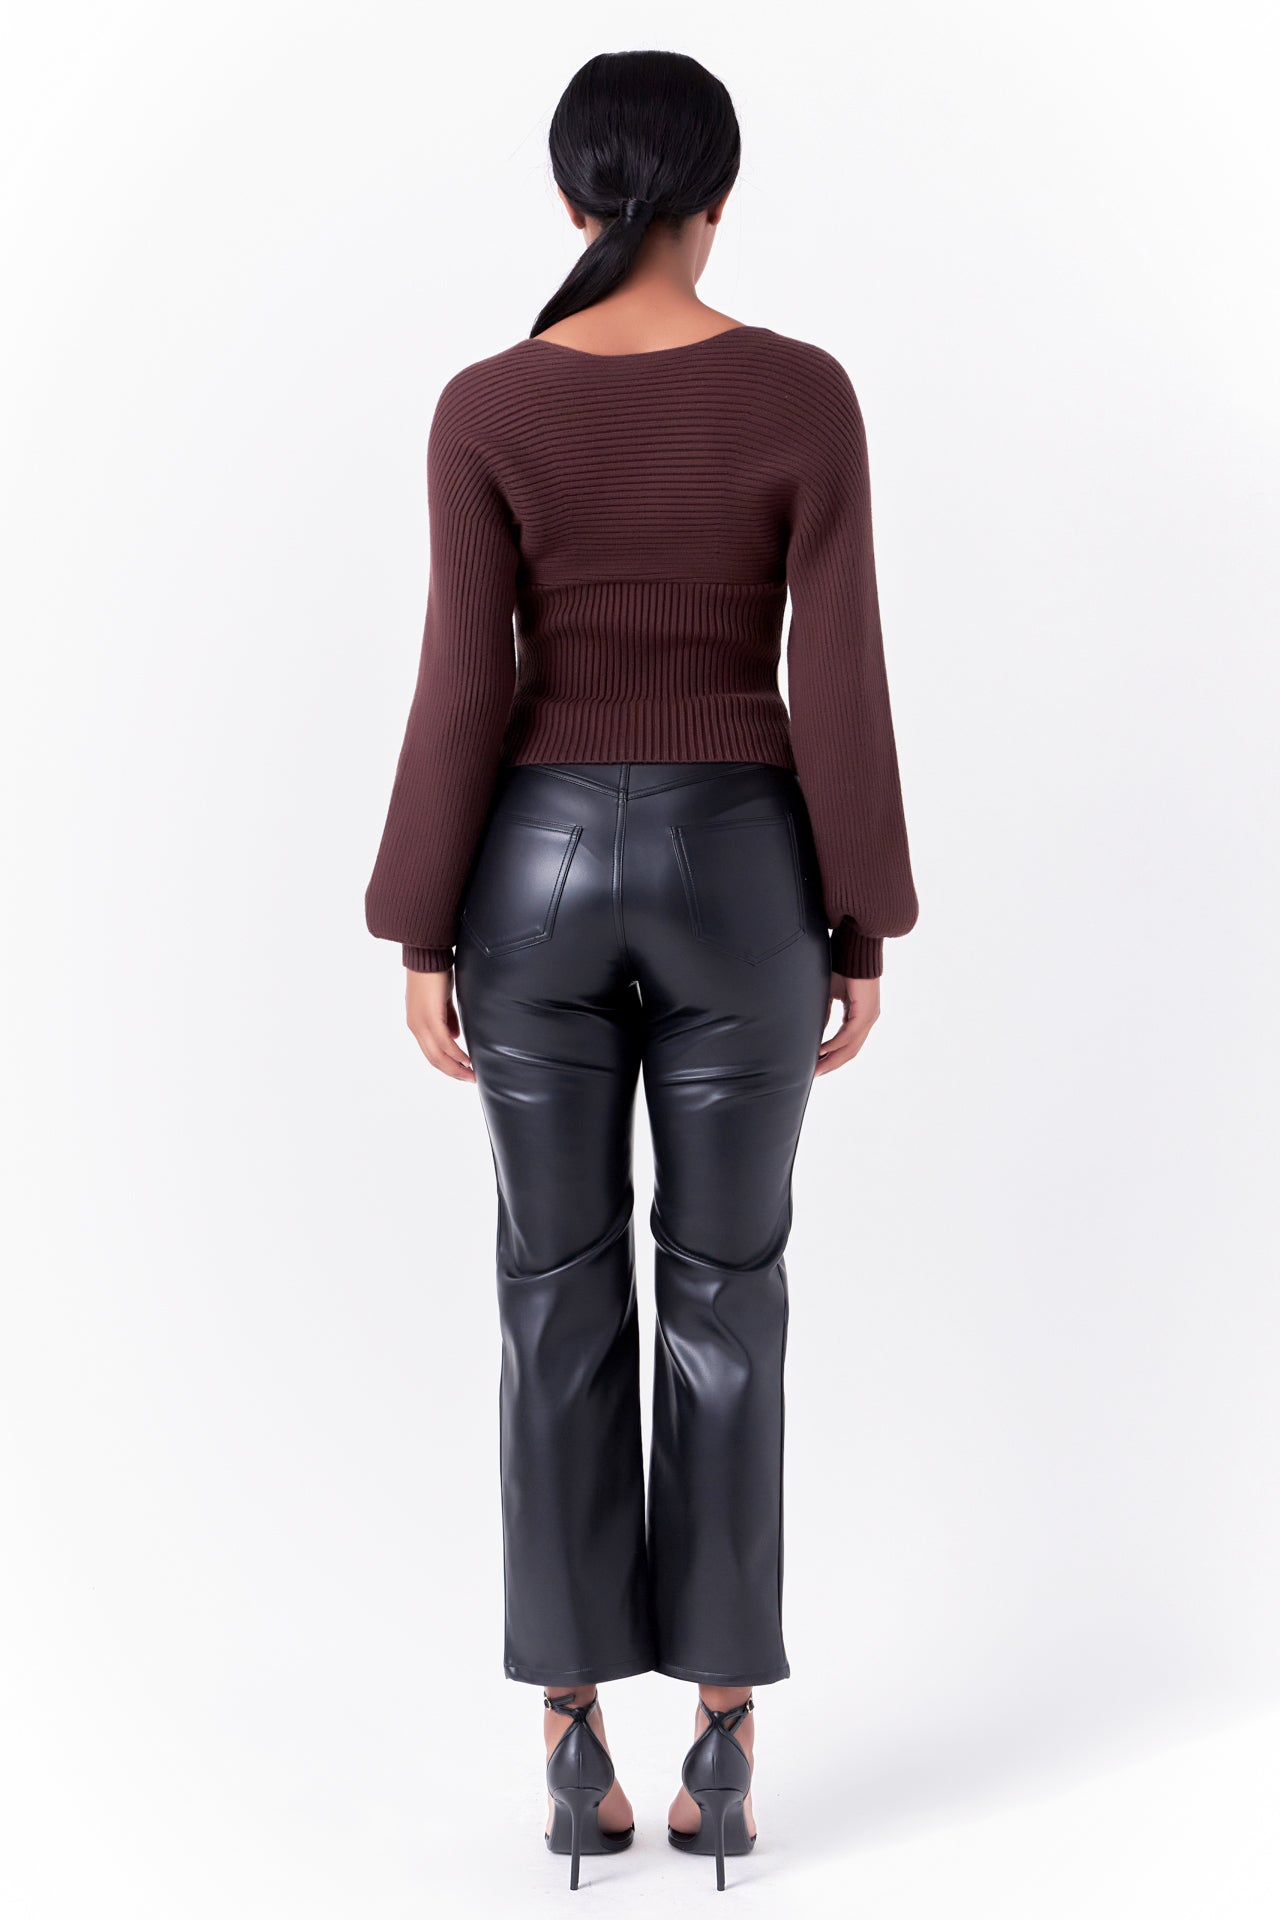 Knitted top in chocolate featuring square neckline, ribbed detailing, balloon sleeves. Back view.